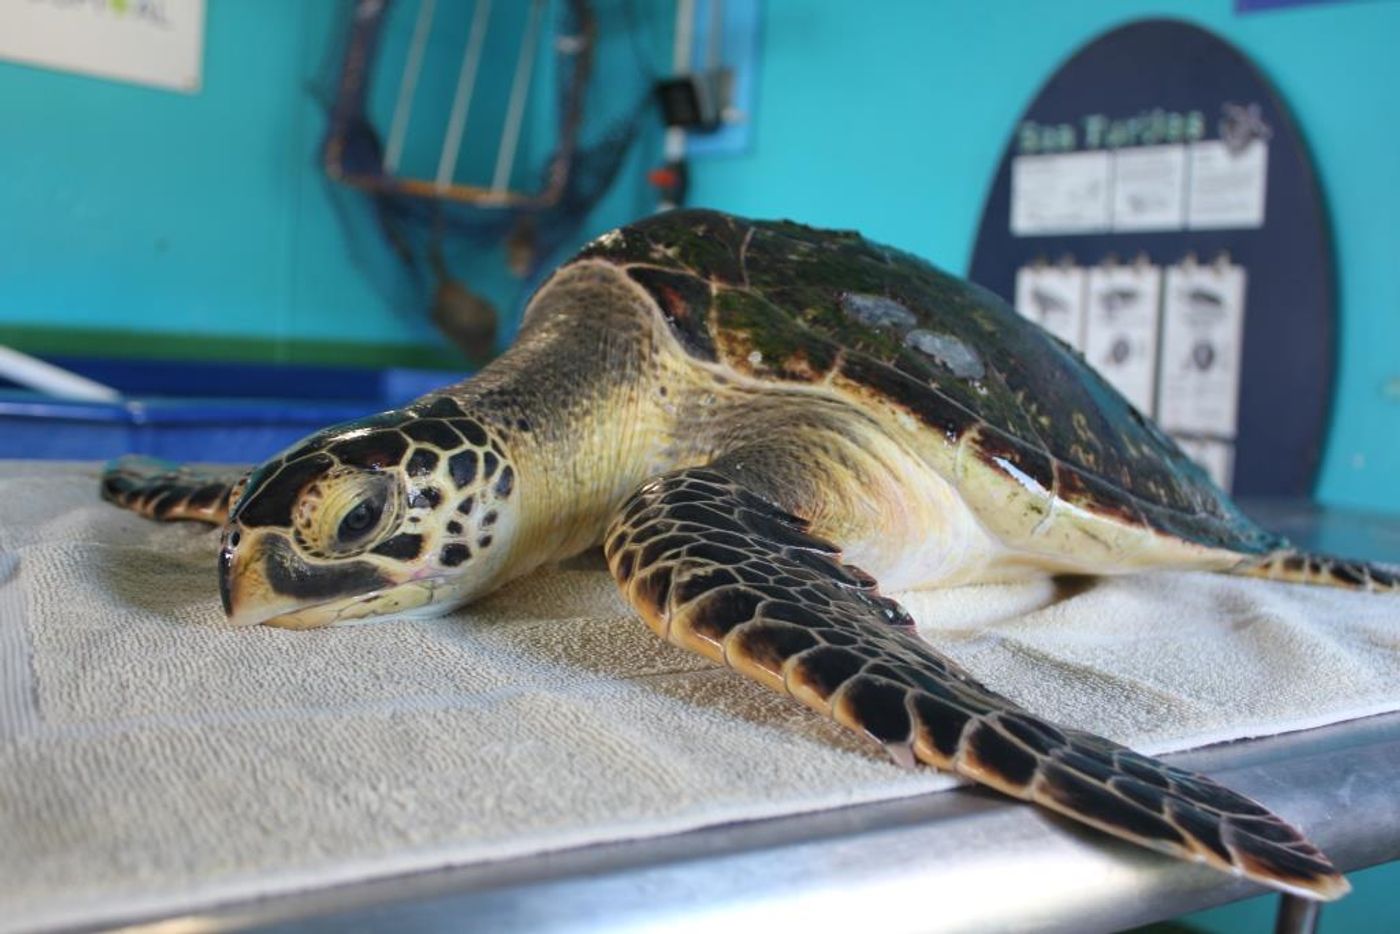 This photo shows the potentially hybrid turtle that was rescued at sea.